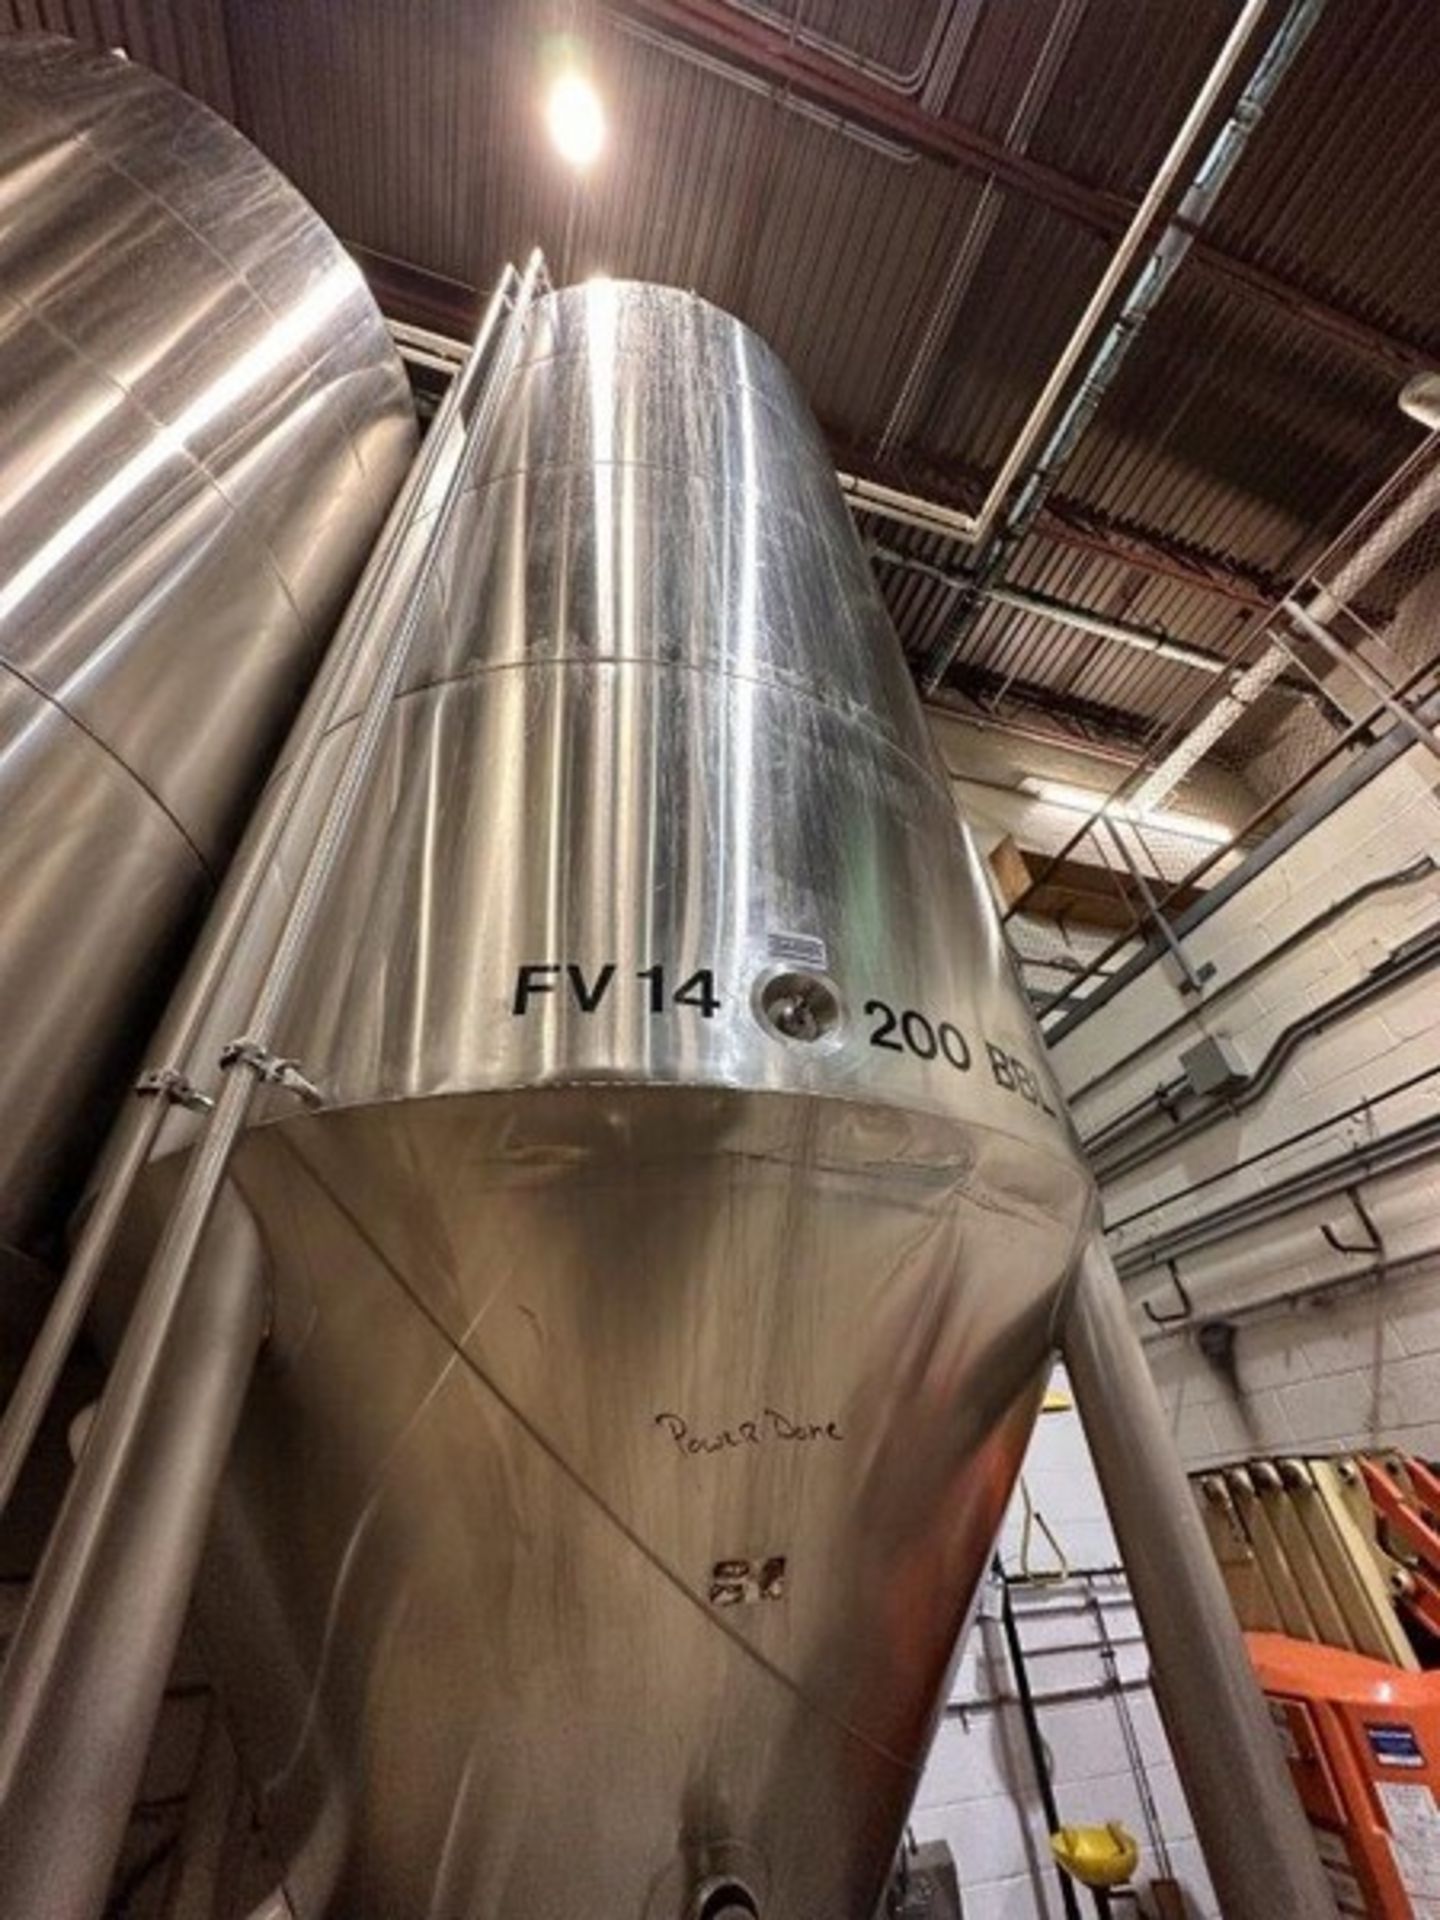 200 BBL Vertical Cone Bottom 304 Stainless Steel Jacketed Vessel. Manufactured by JV Northwest (ICC)